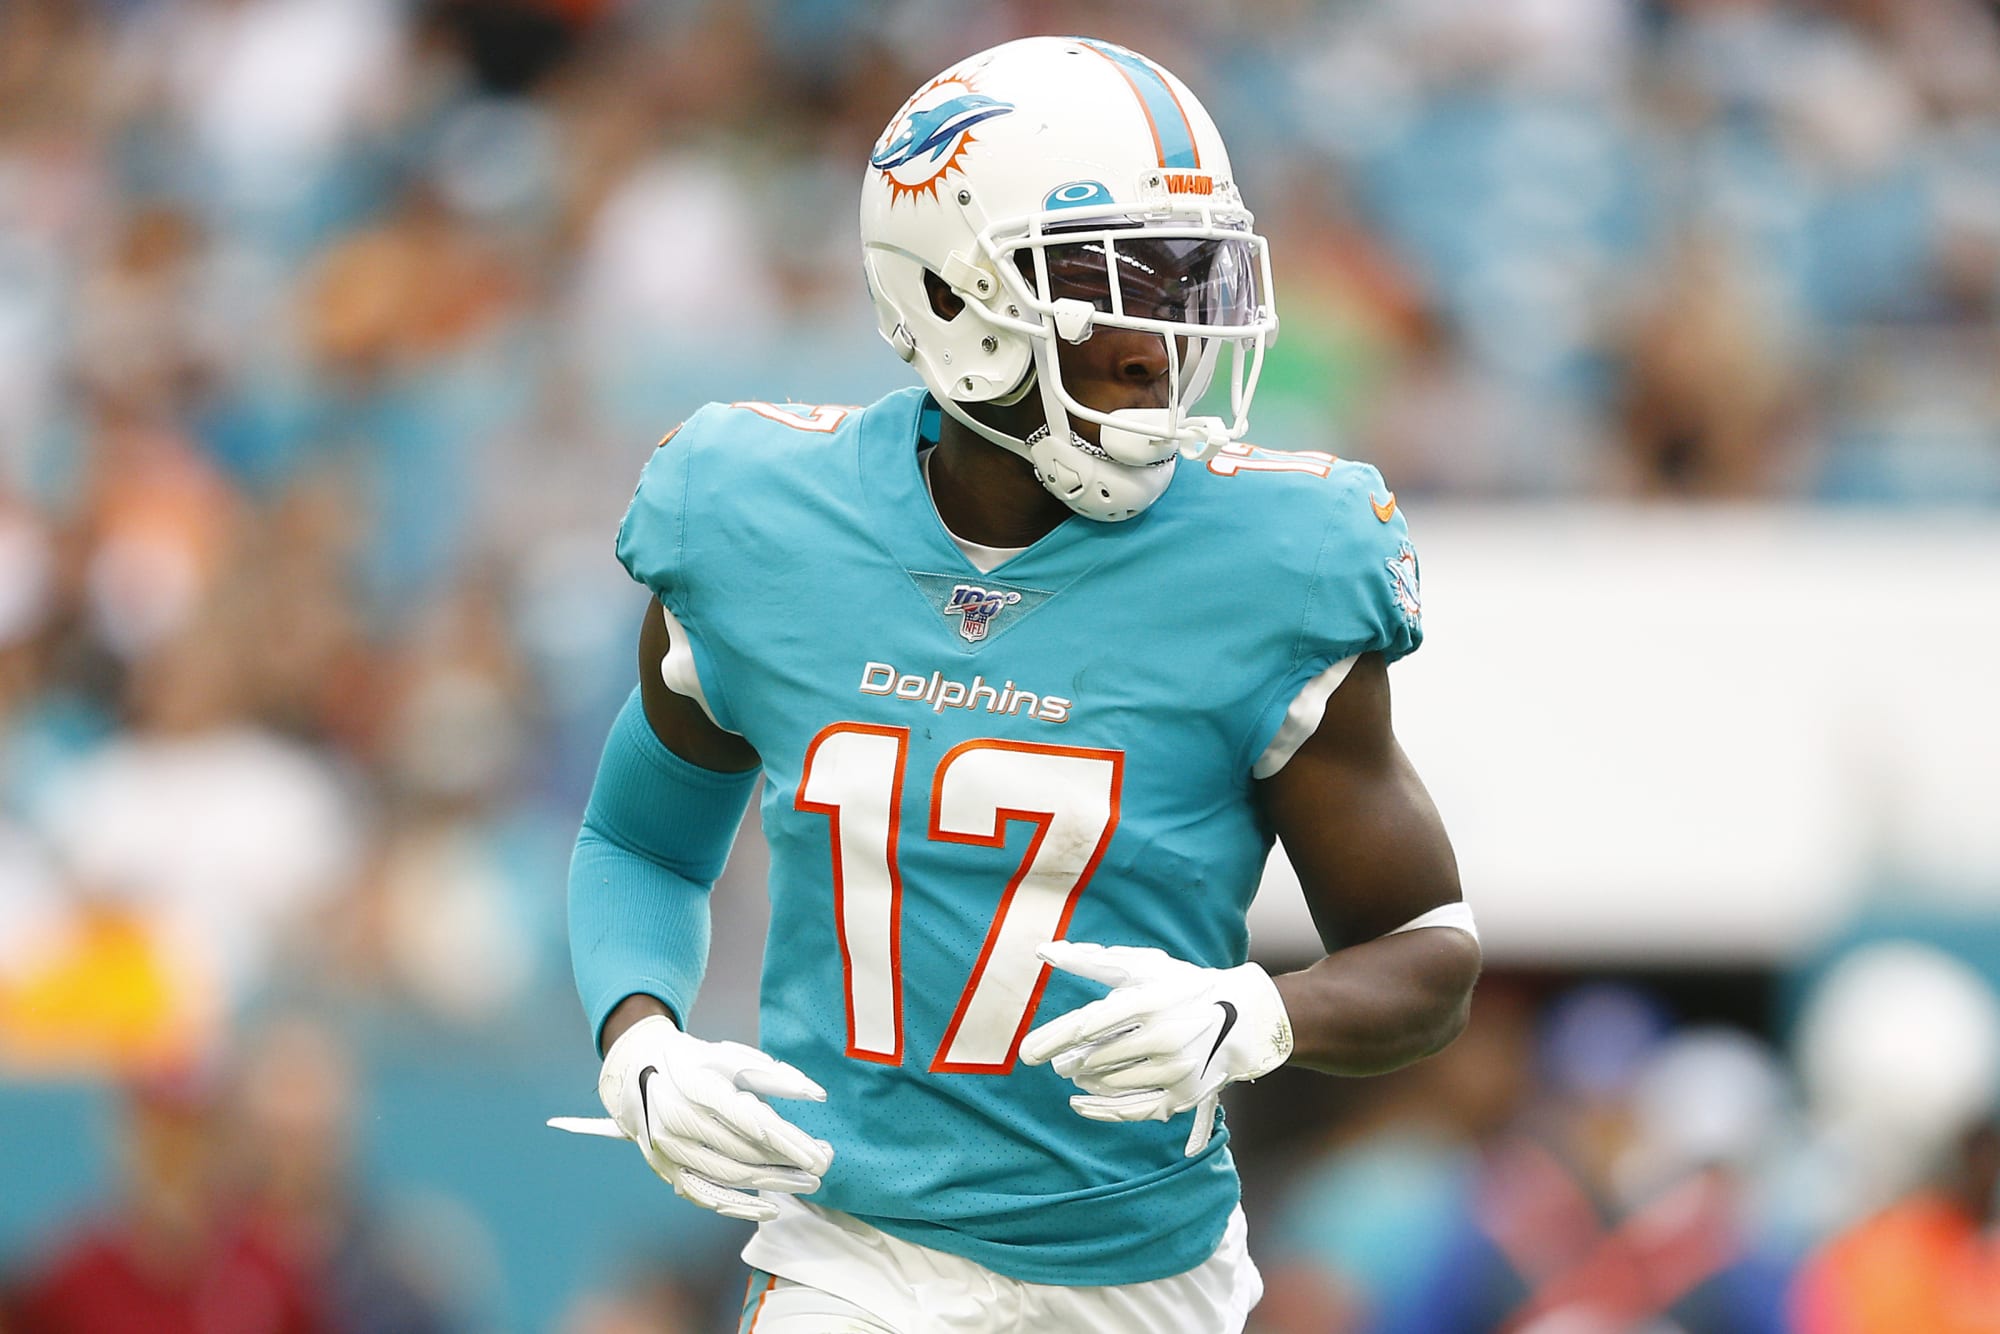 2020-miami-dolphins-players-previews-allen-hurns